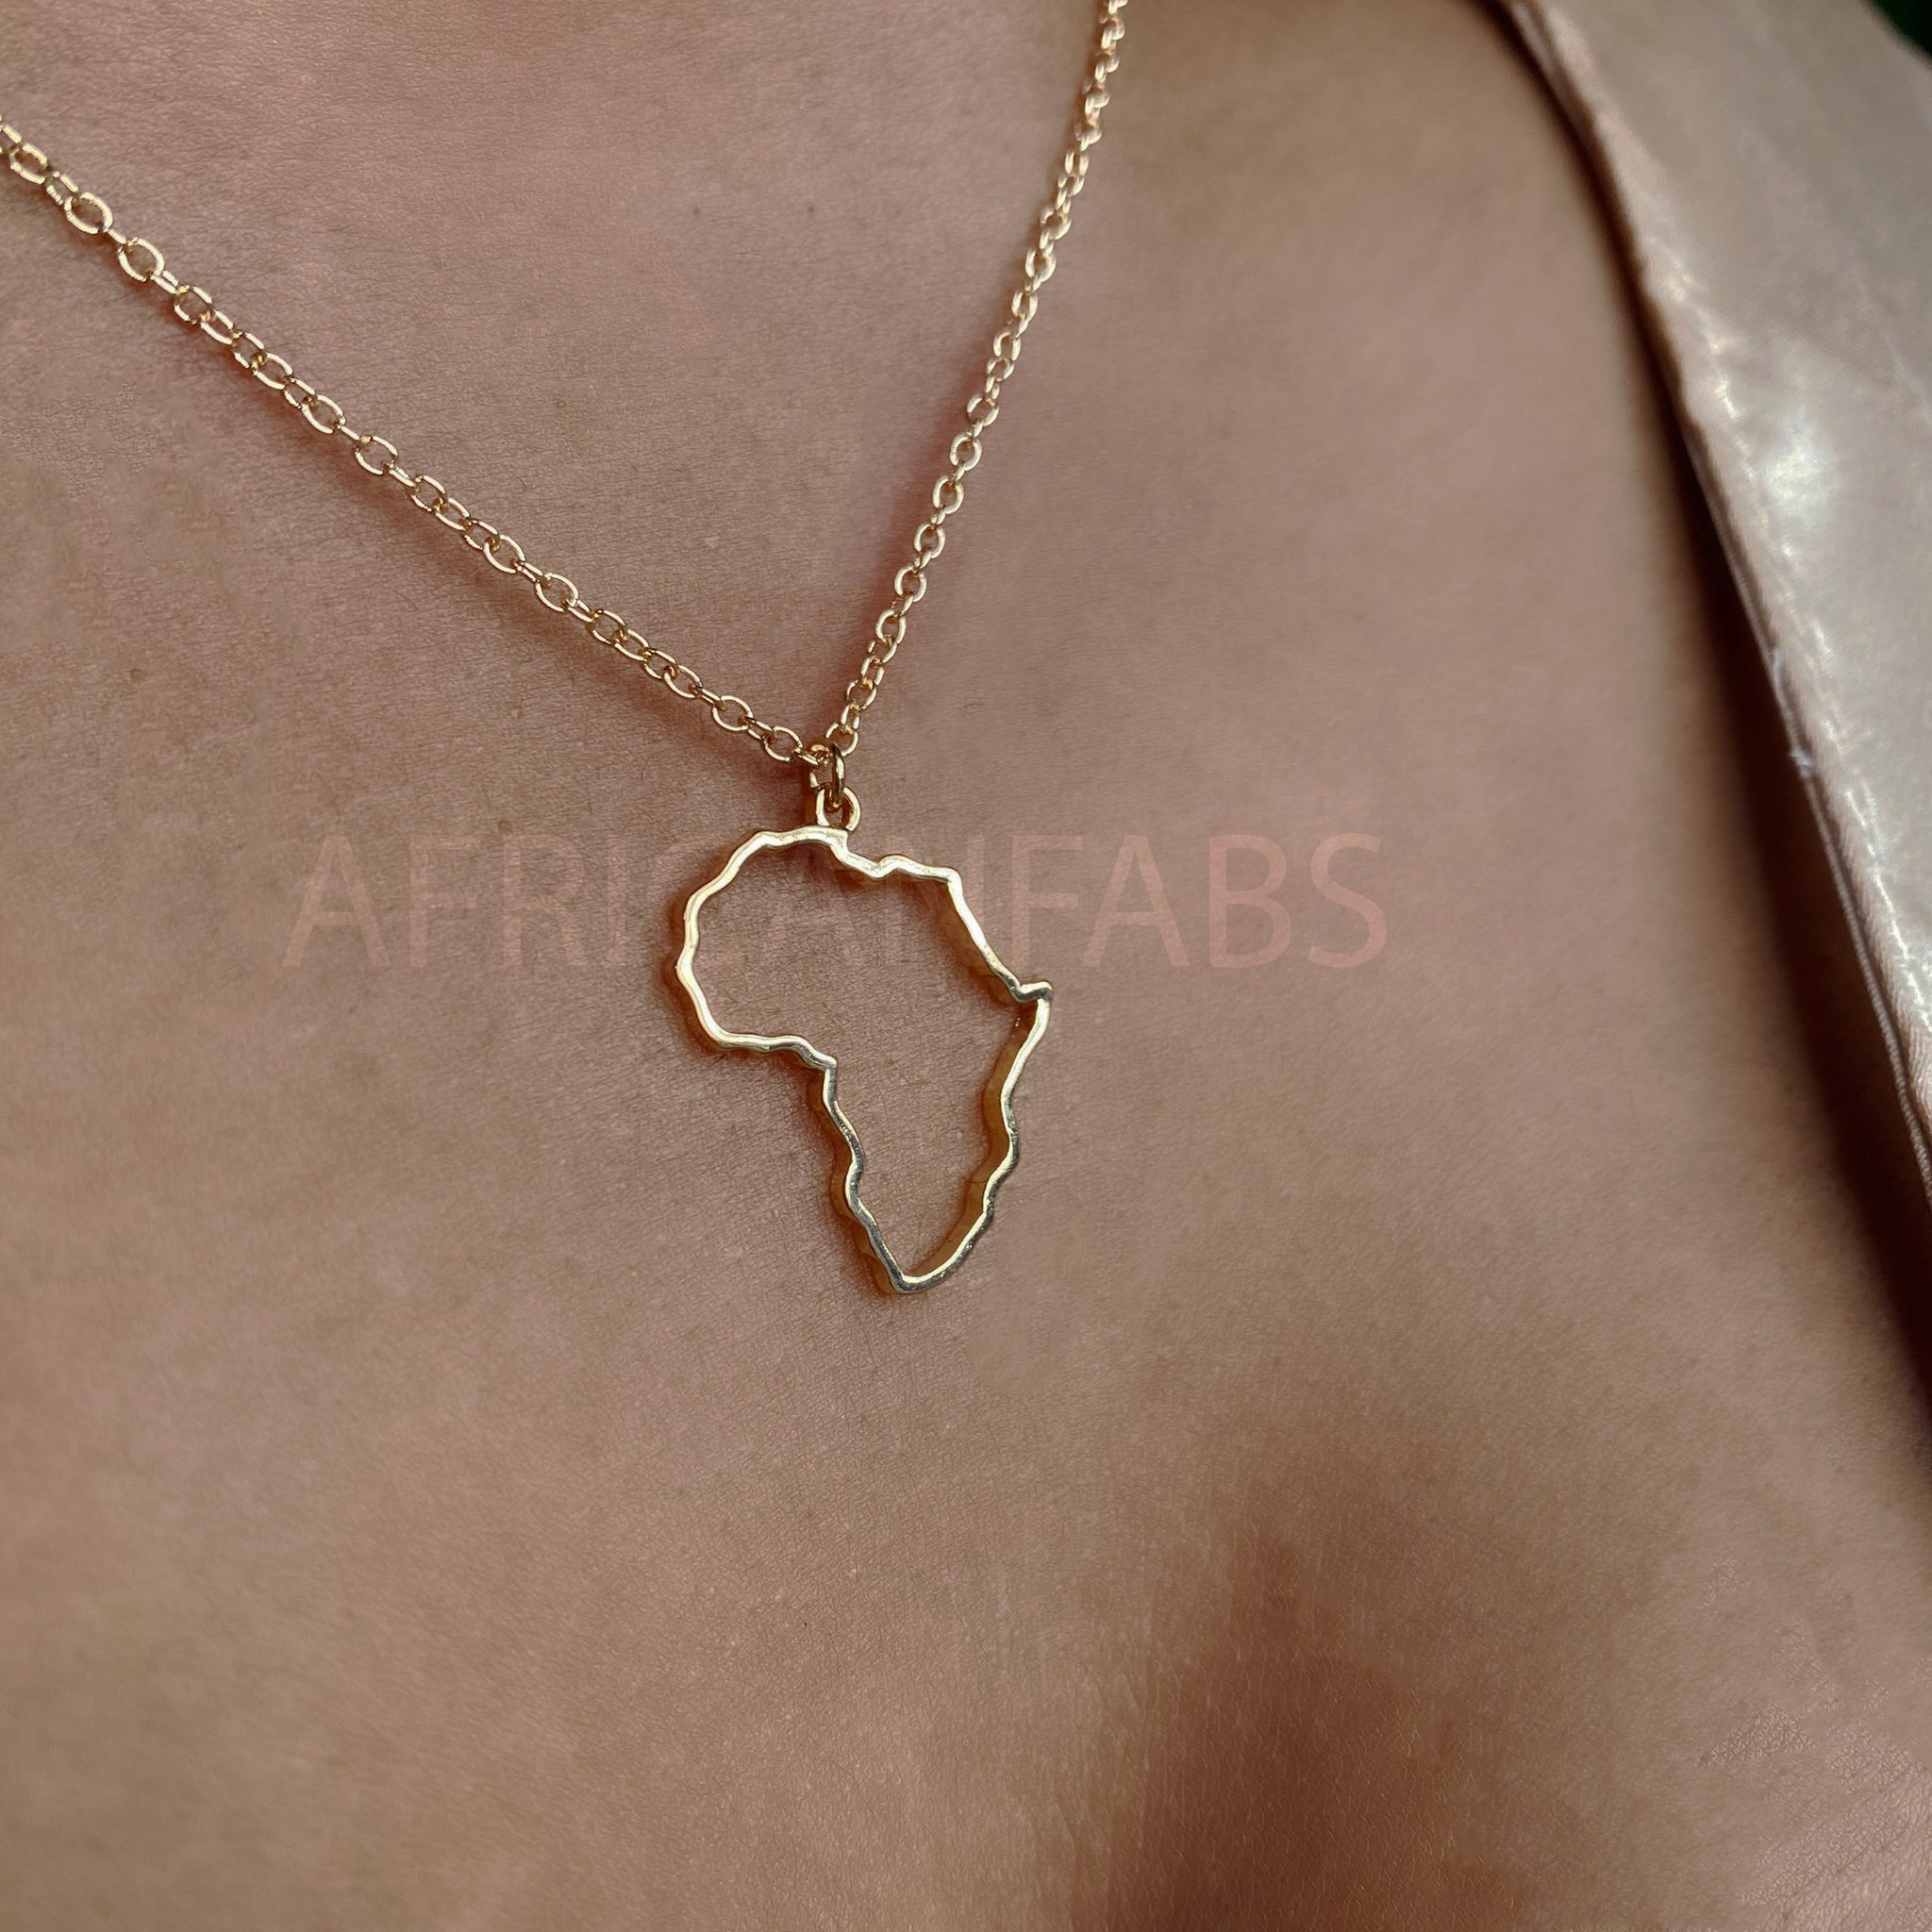 Ketting / halsketting / hanger - Afrikaans continent - Goud